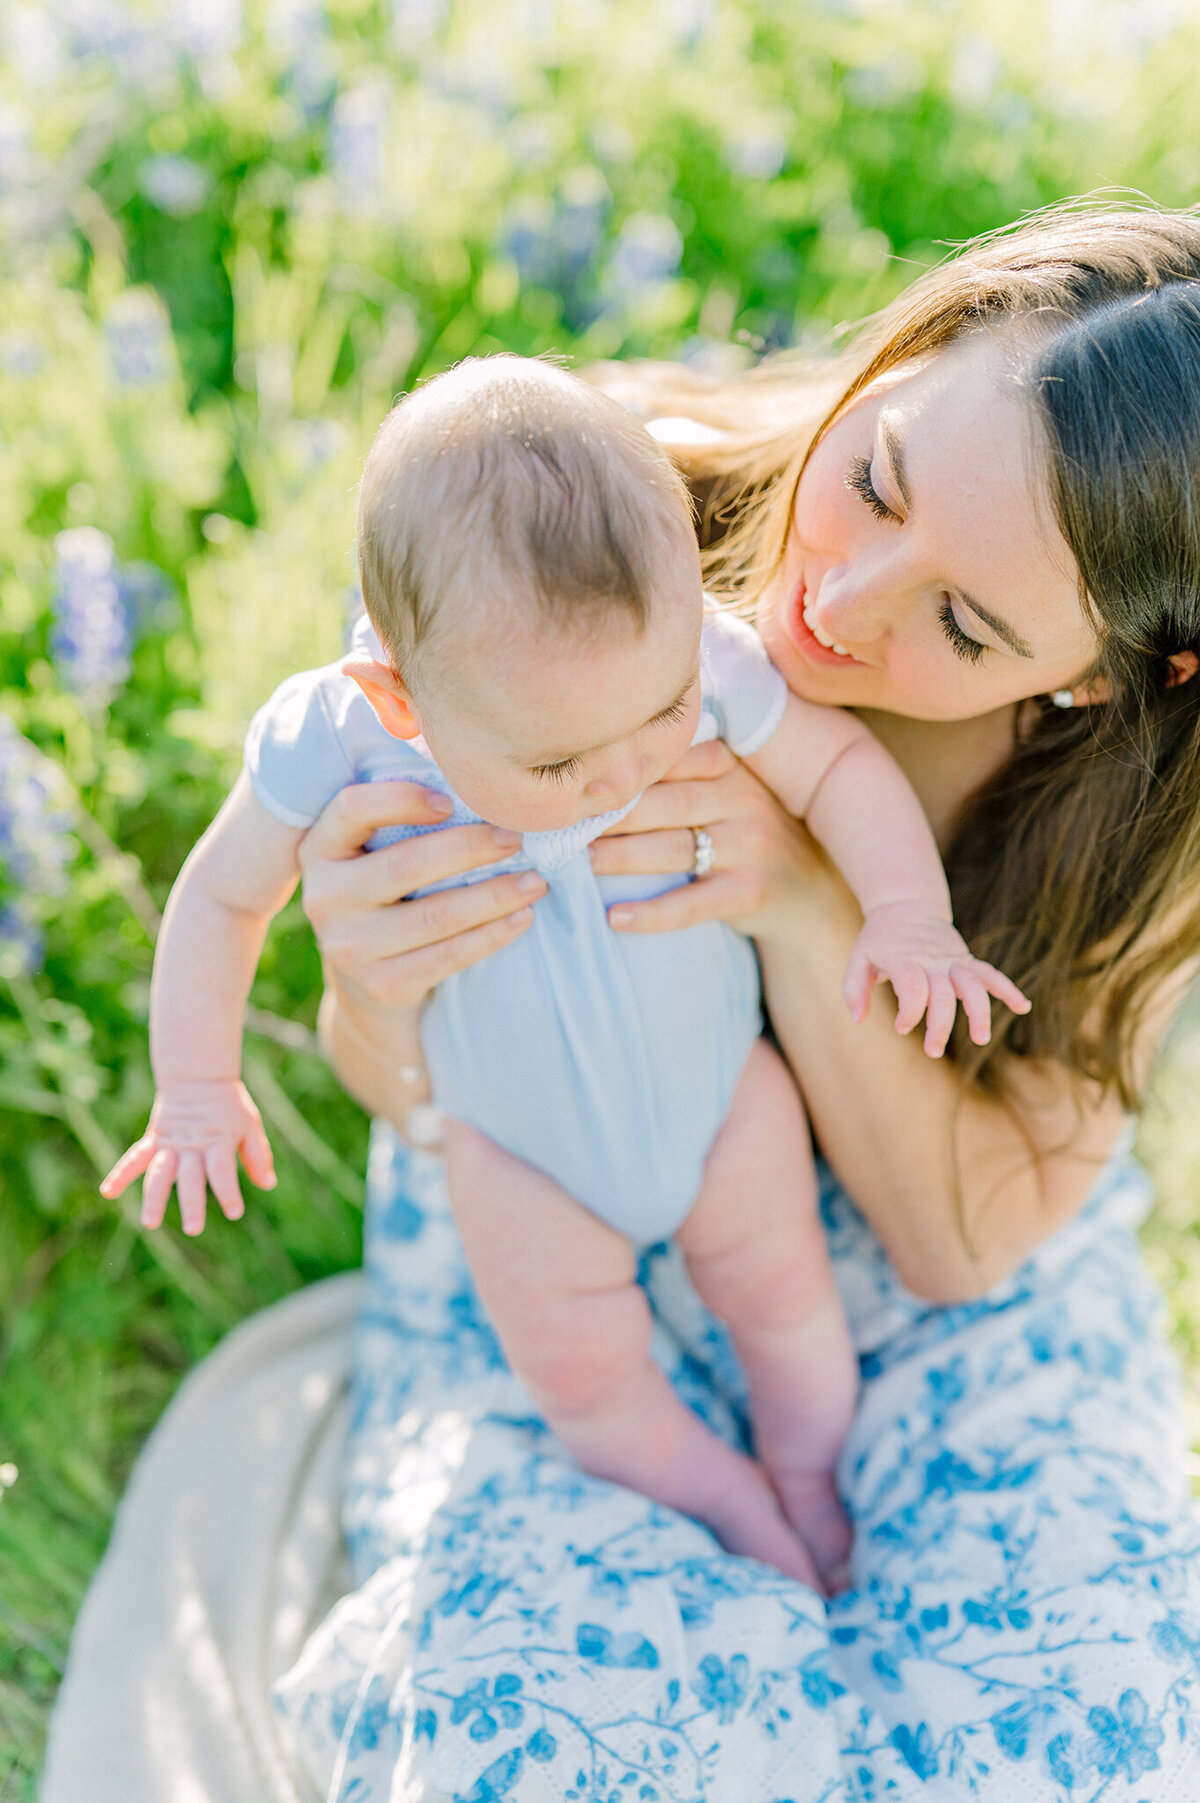 Mother palying with her baby in a field of bluebonnets.